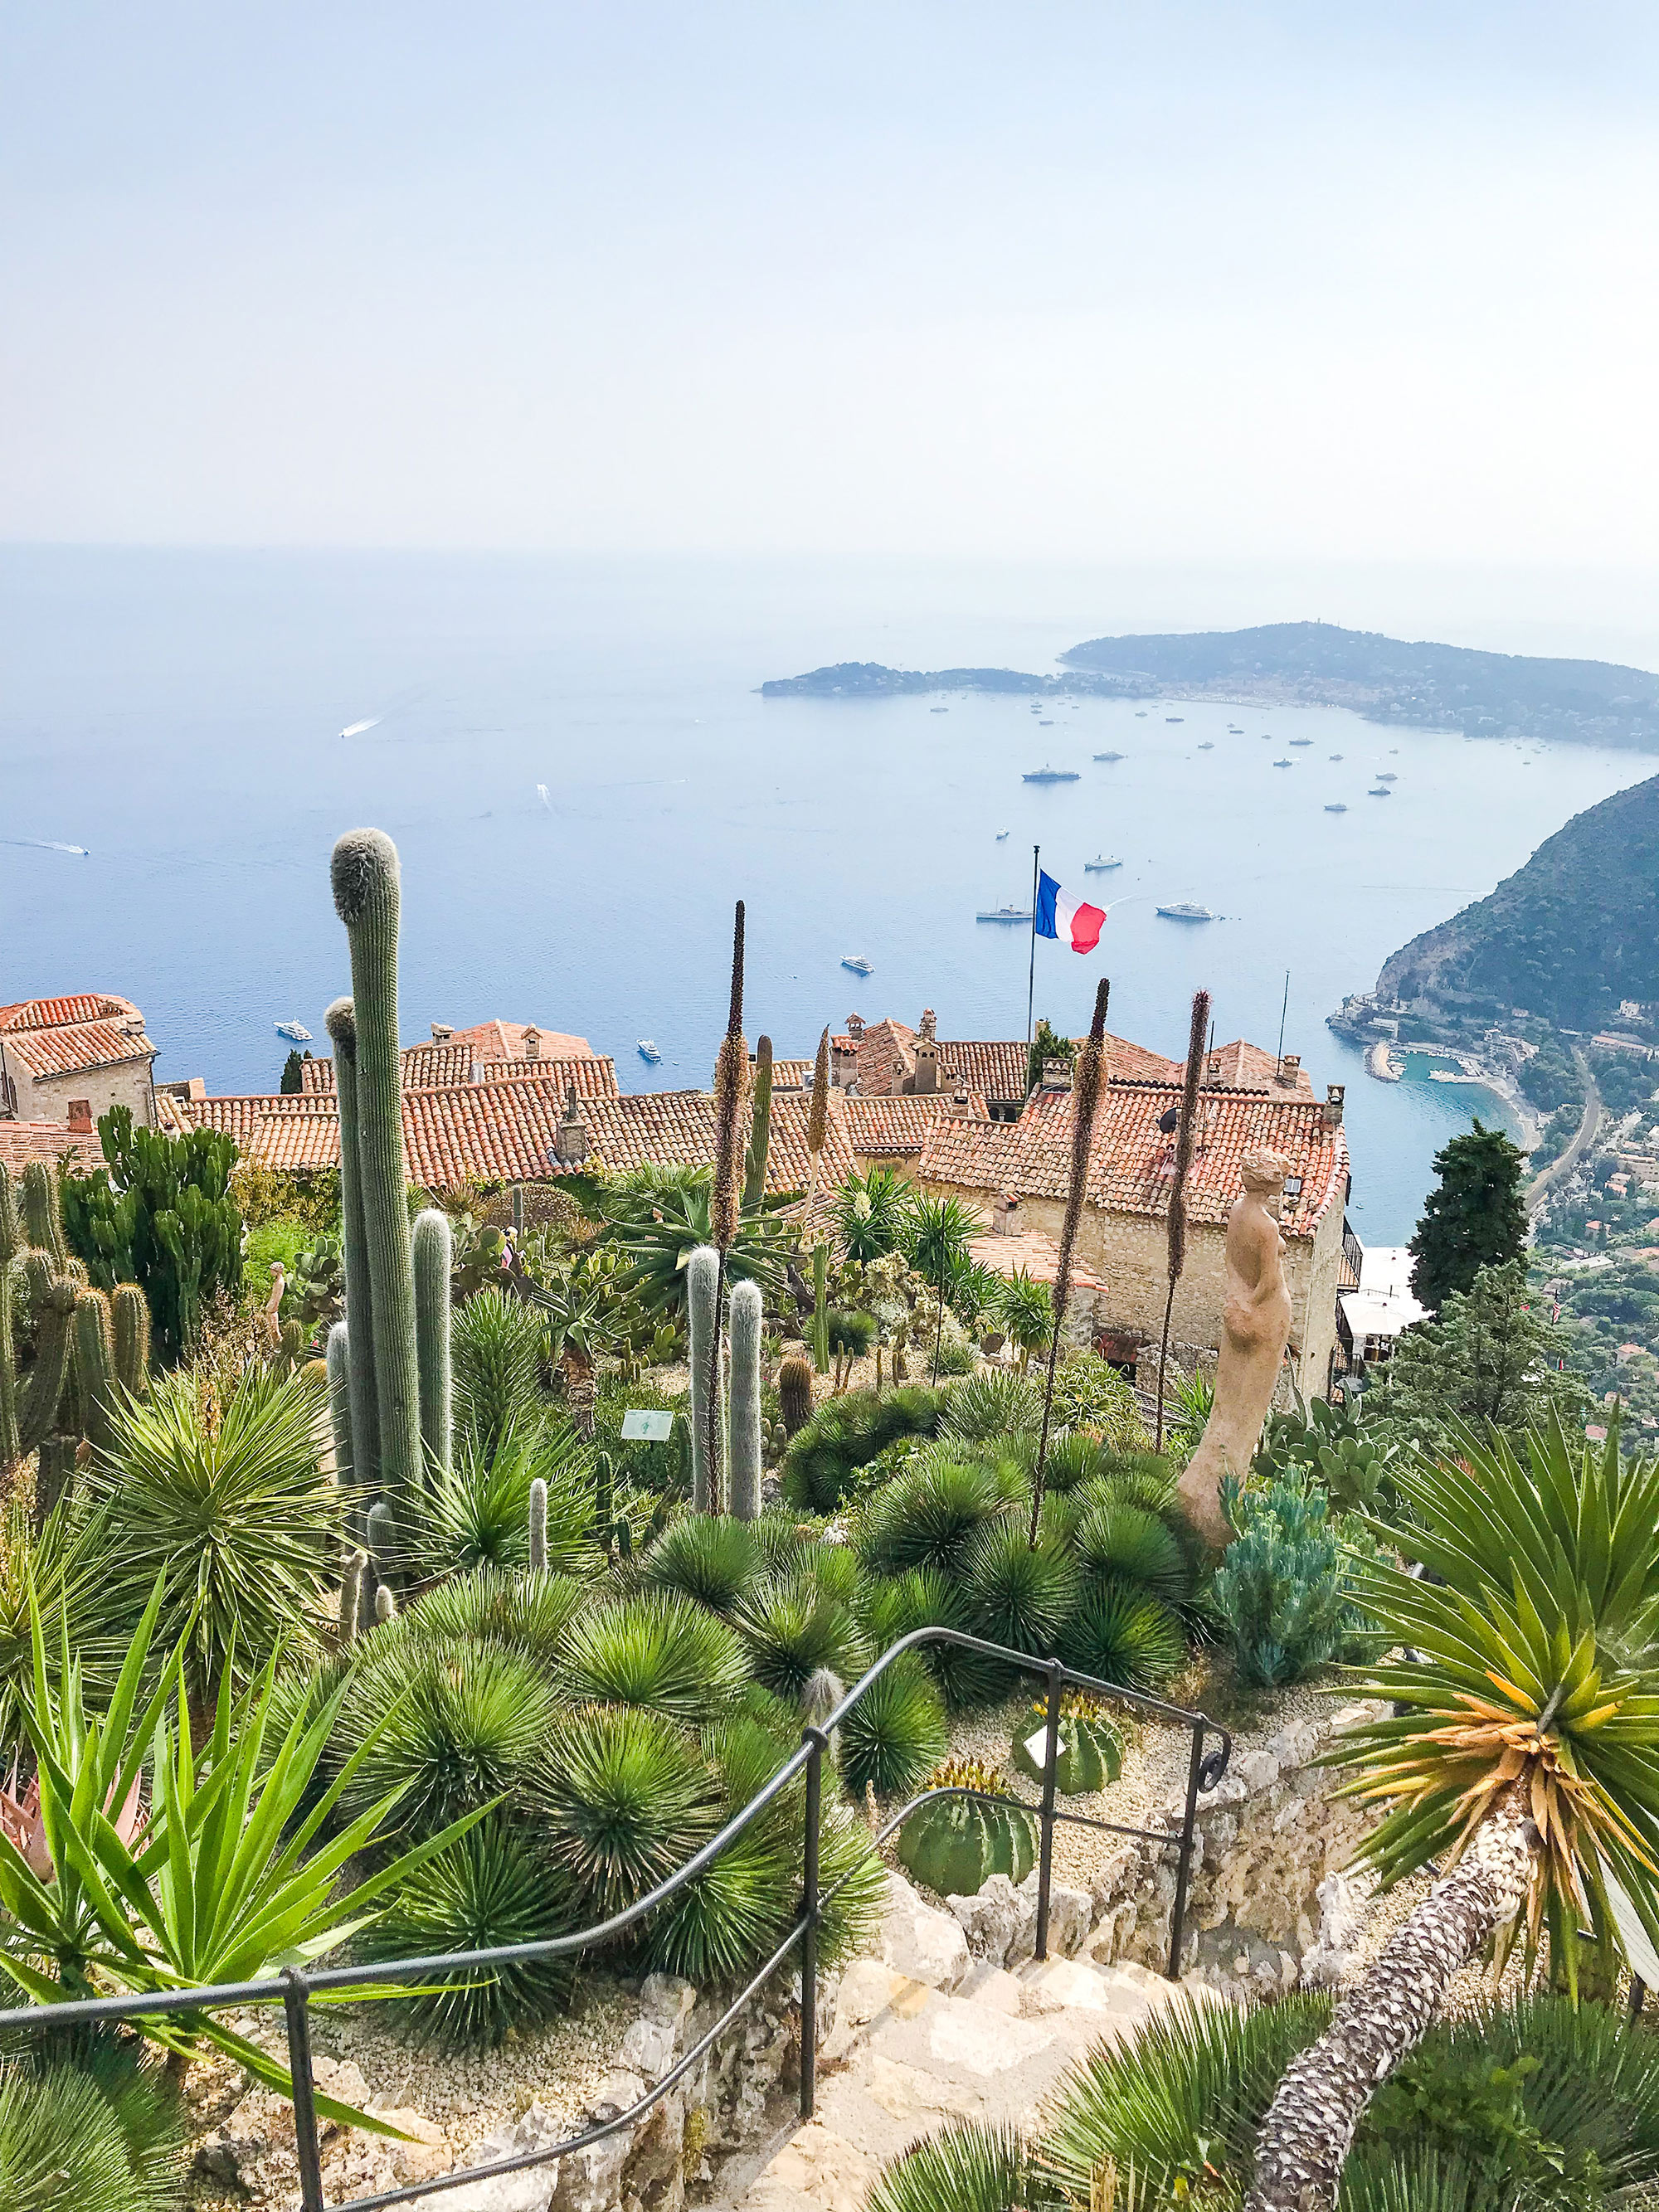 Looking down on idyllic seaside town on the French Riviera